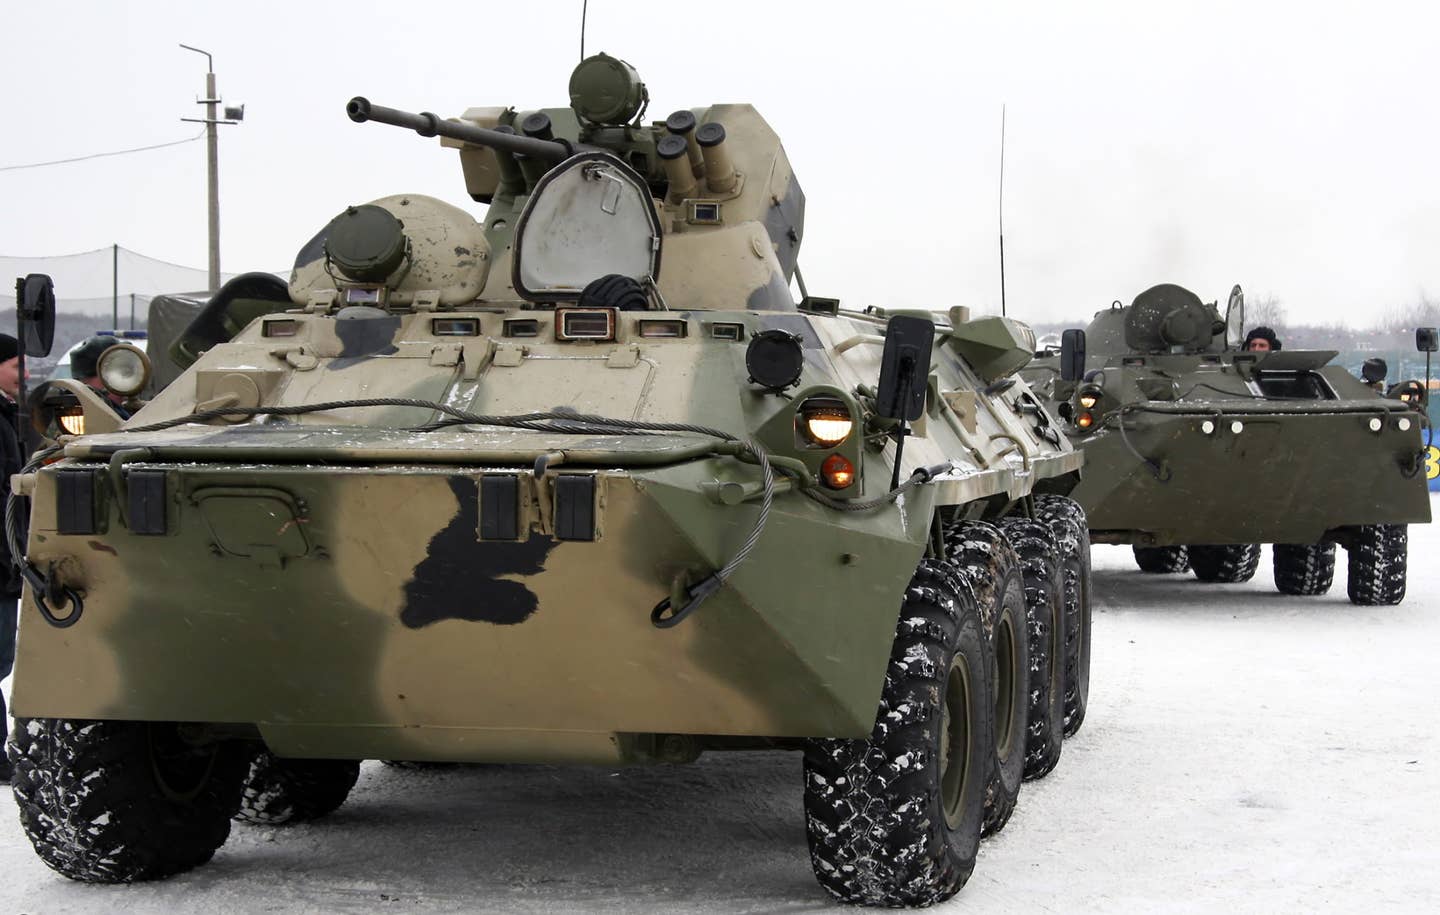 A BTR-80A, showing the 30mm autocannon. (Image from Wikimedia Commons)